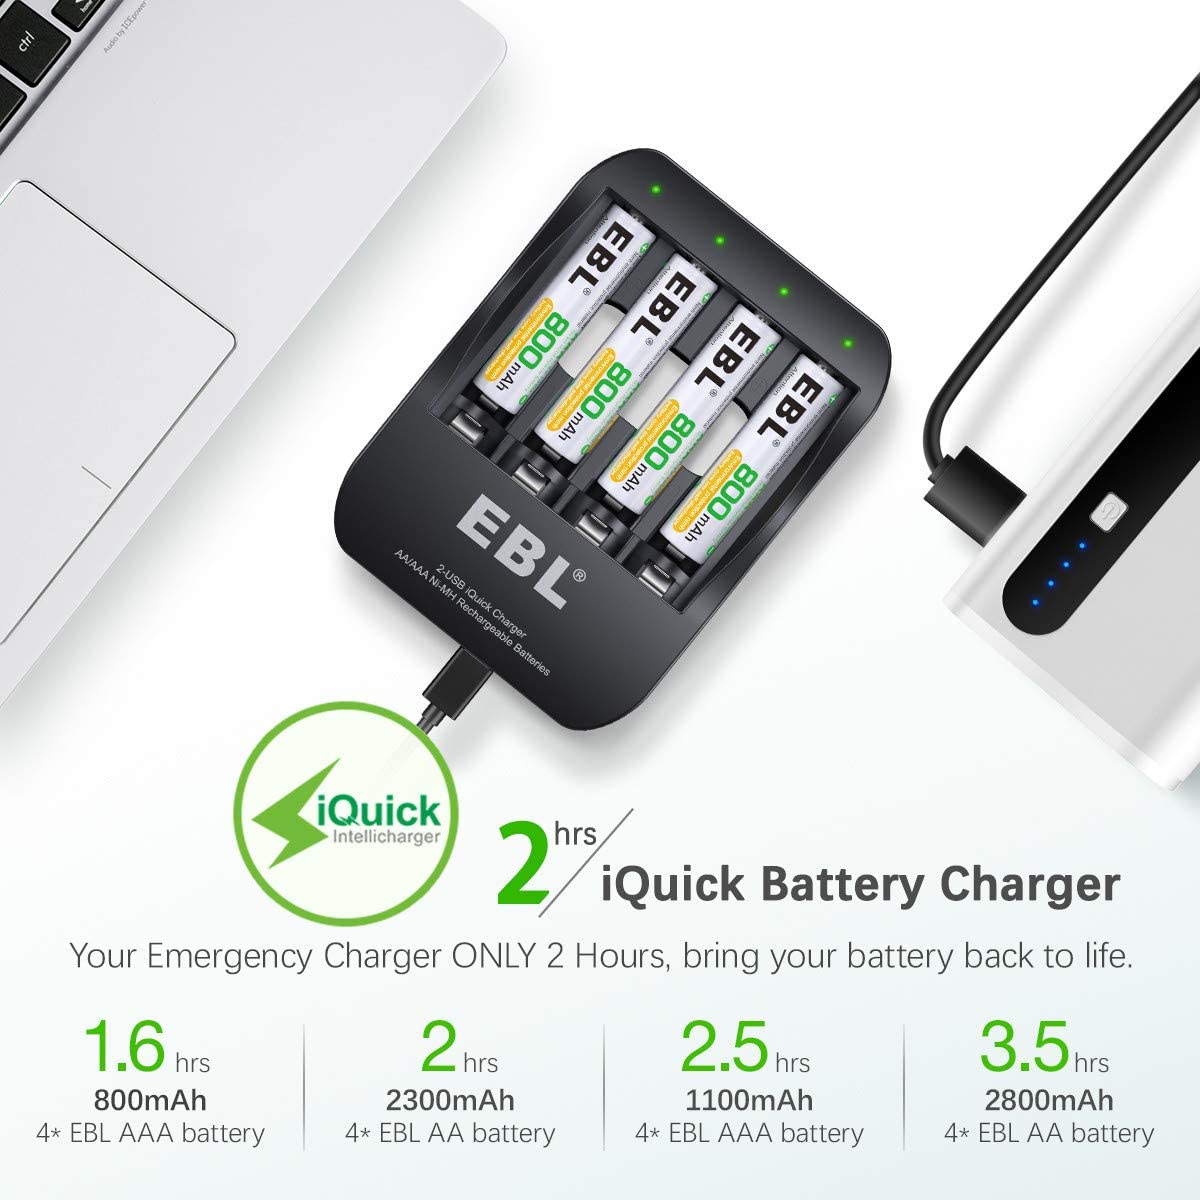 EBL Smart AA AAA NiMH Rechargeable Battery Charger – 2A USB